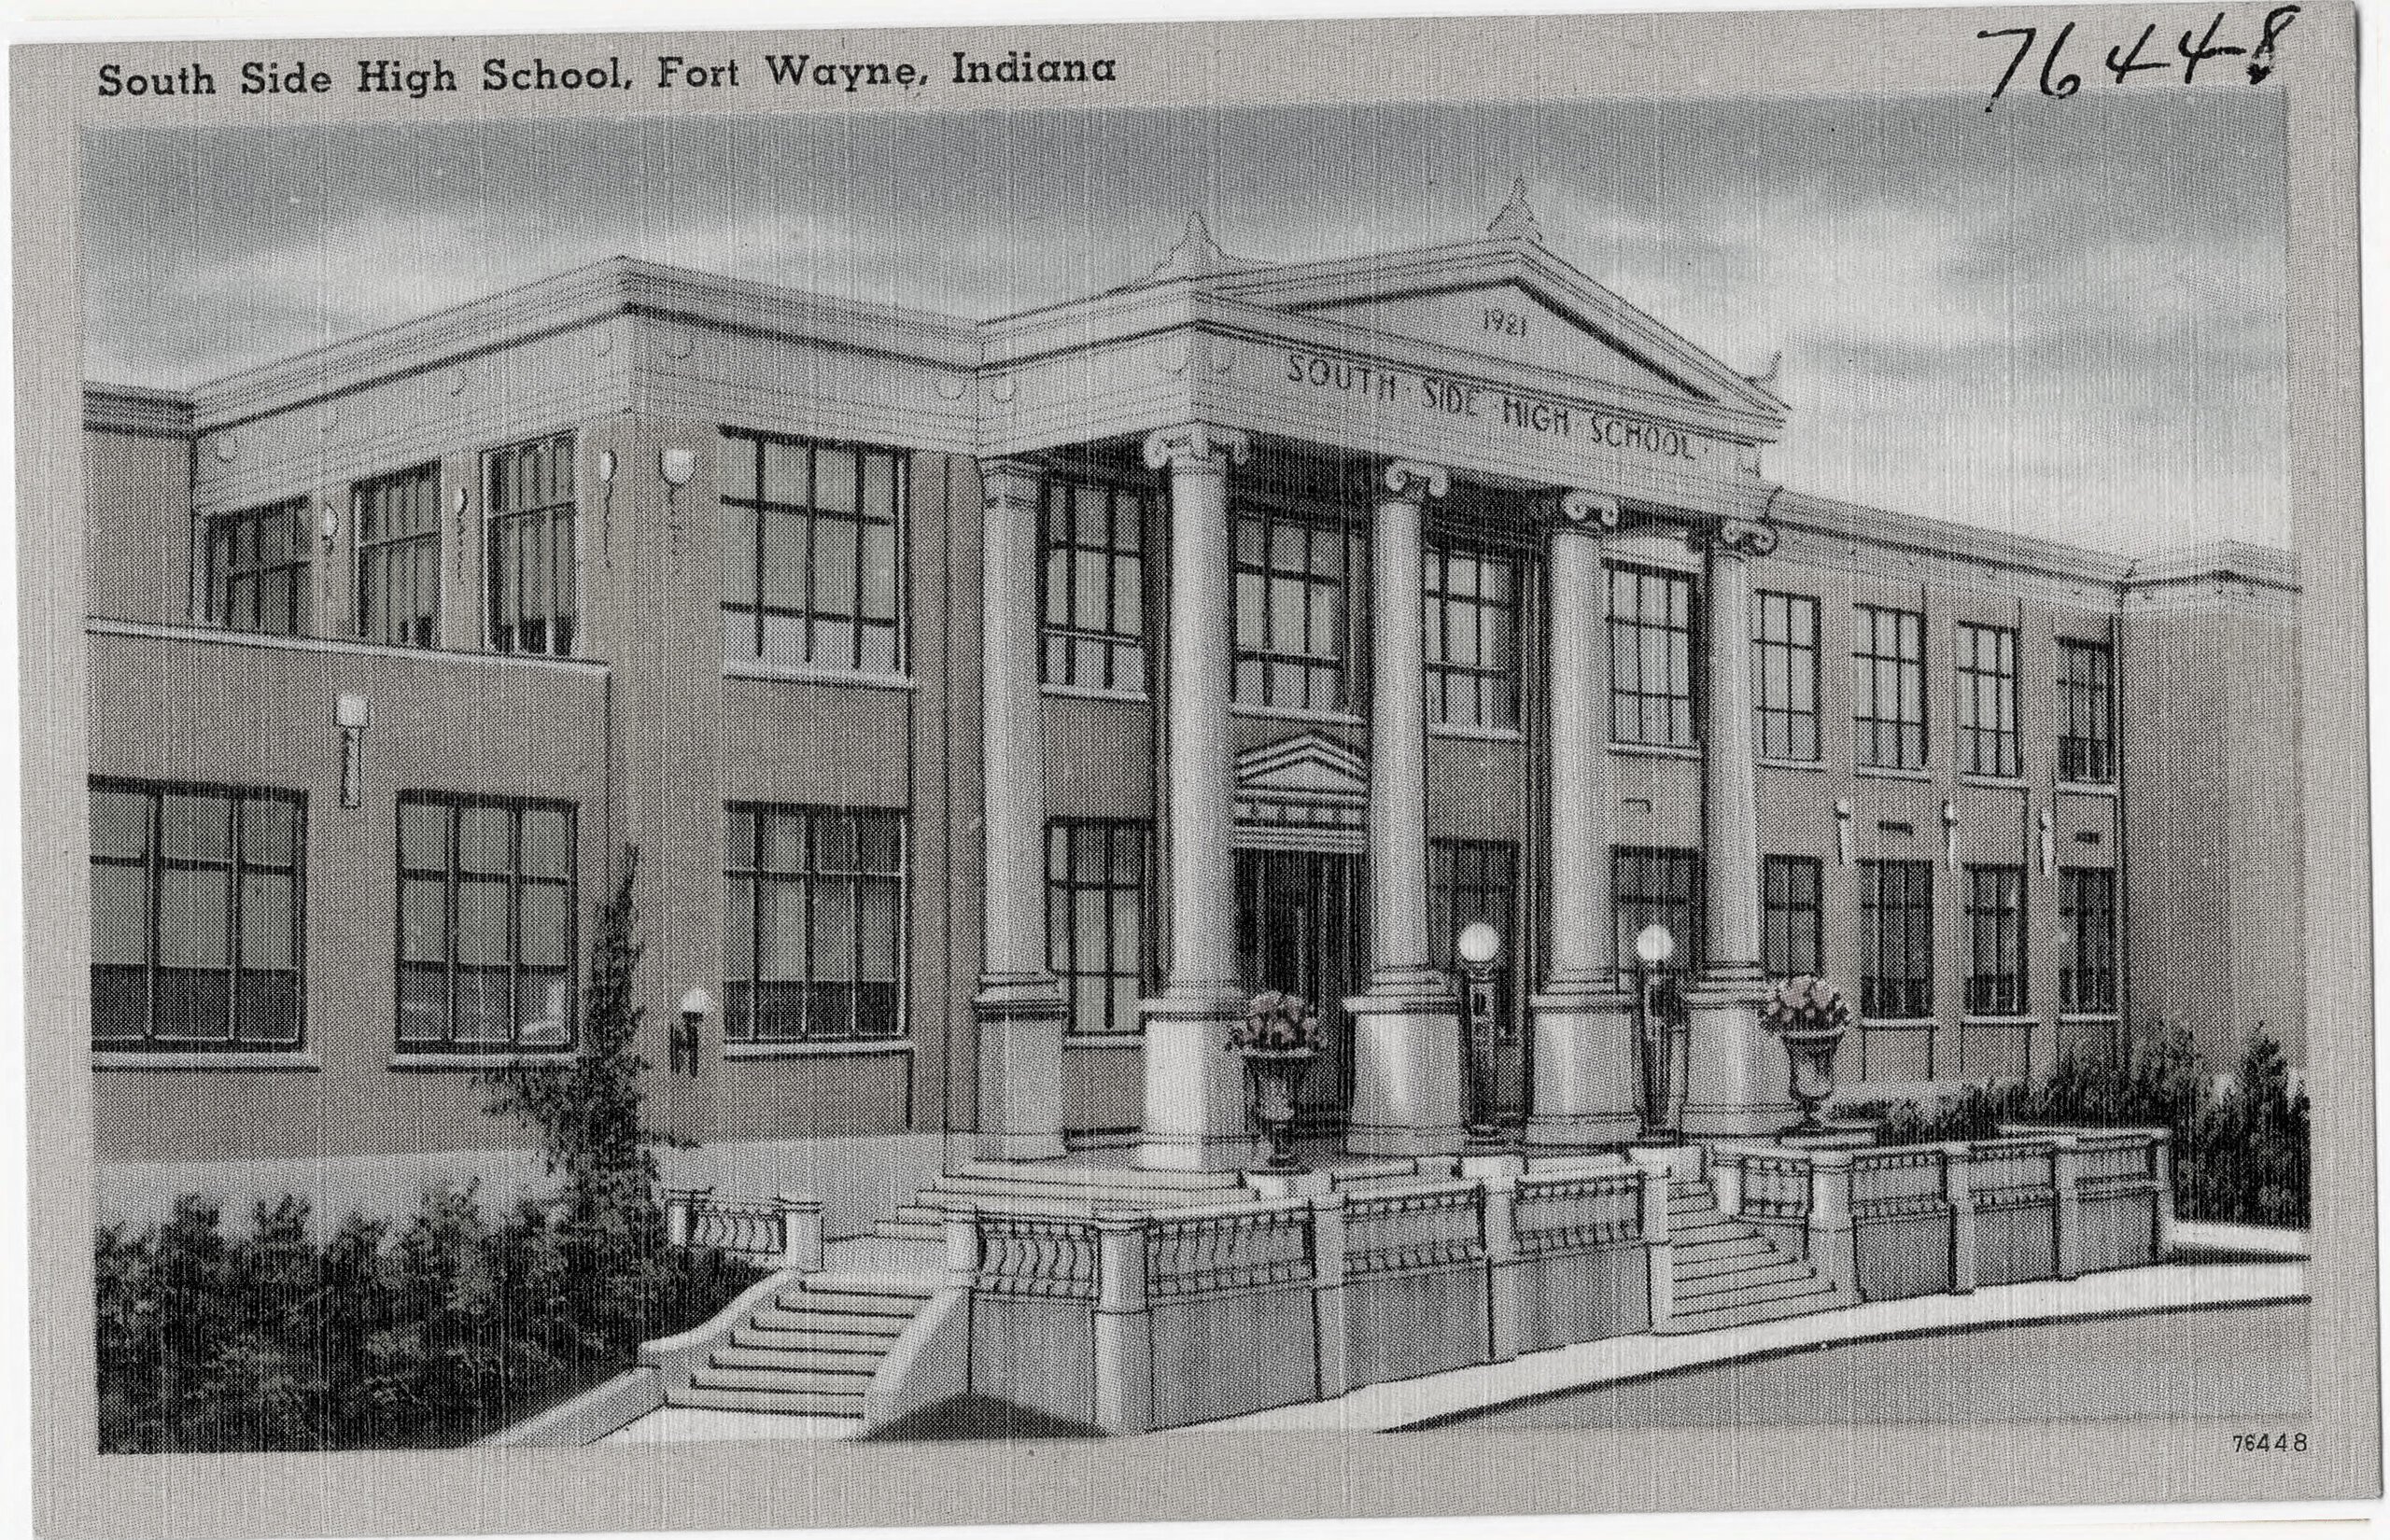 Blass graduated from South Side High School in 1939.